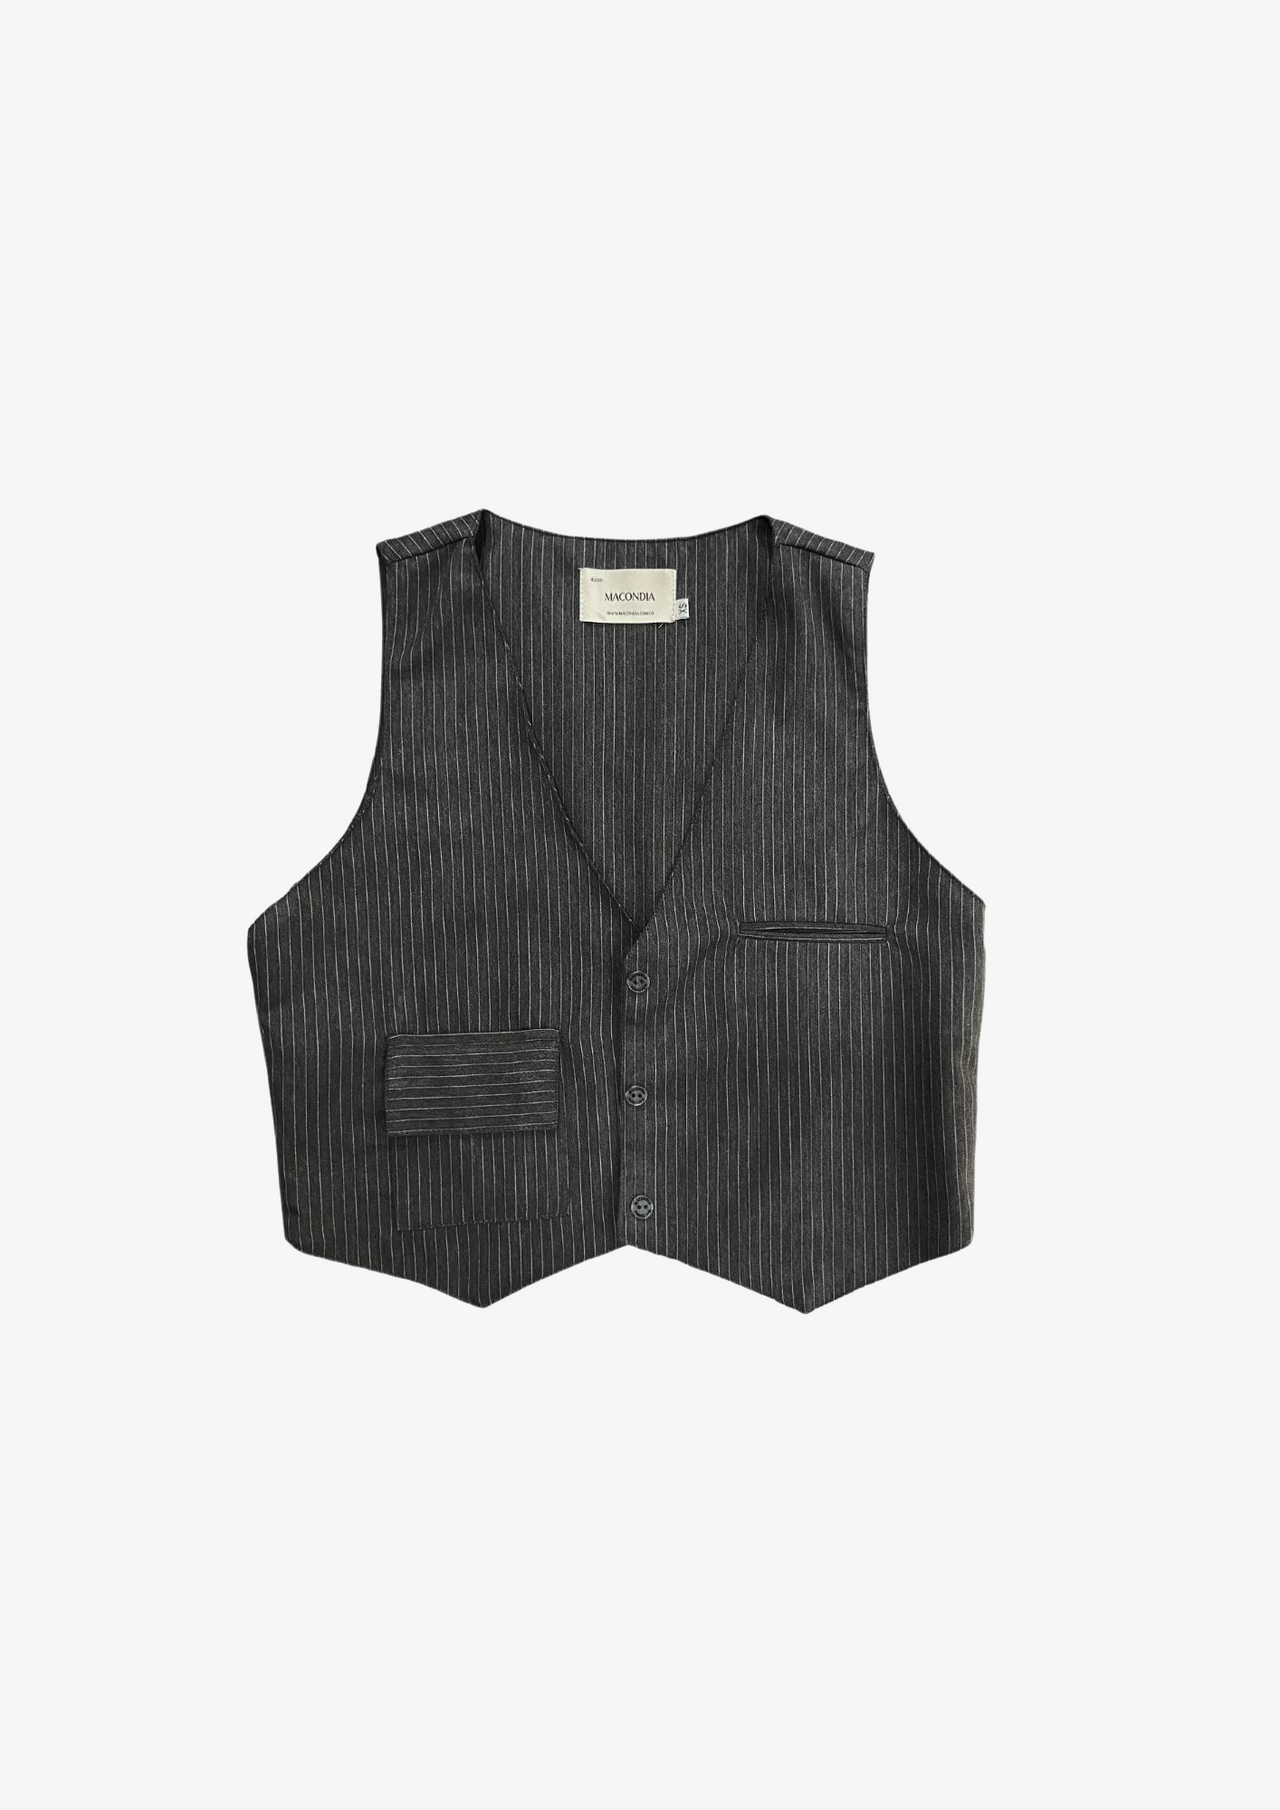 The Office Vest